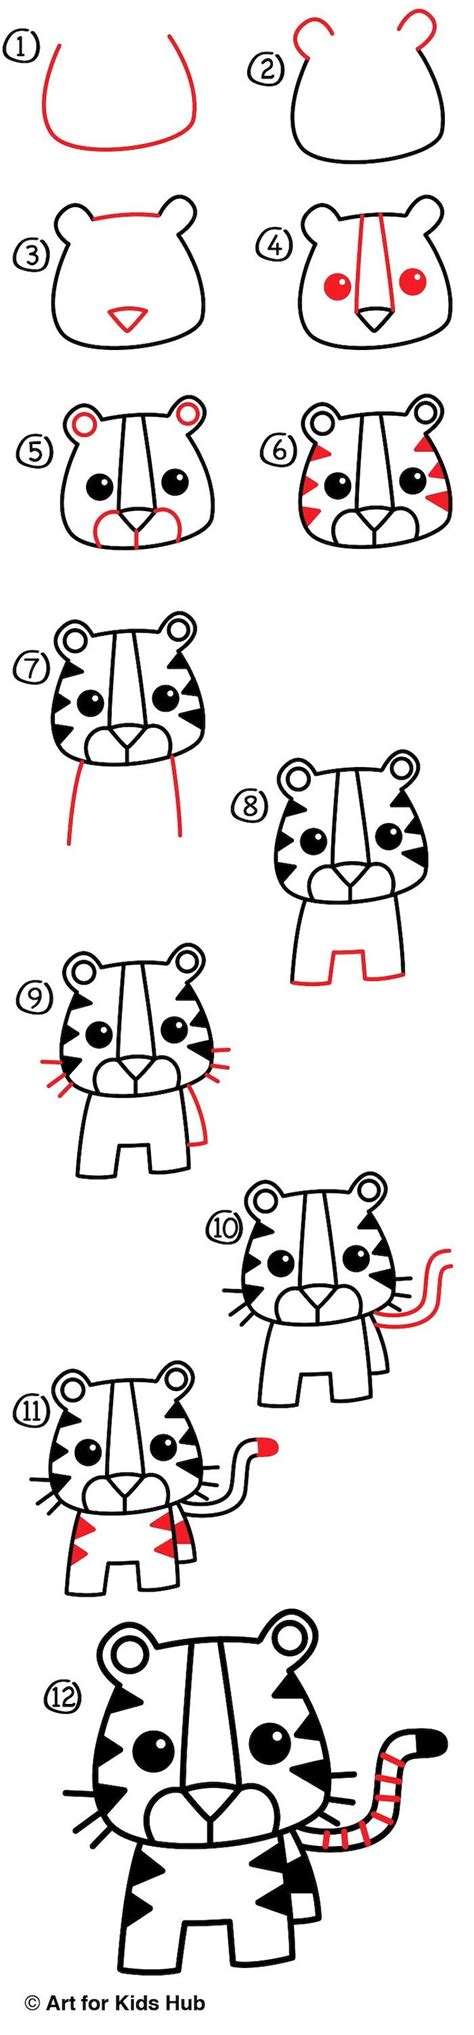 How To Draw A Cute Baby Tiger Gordon Comanny